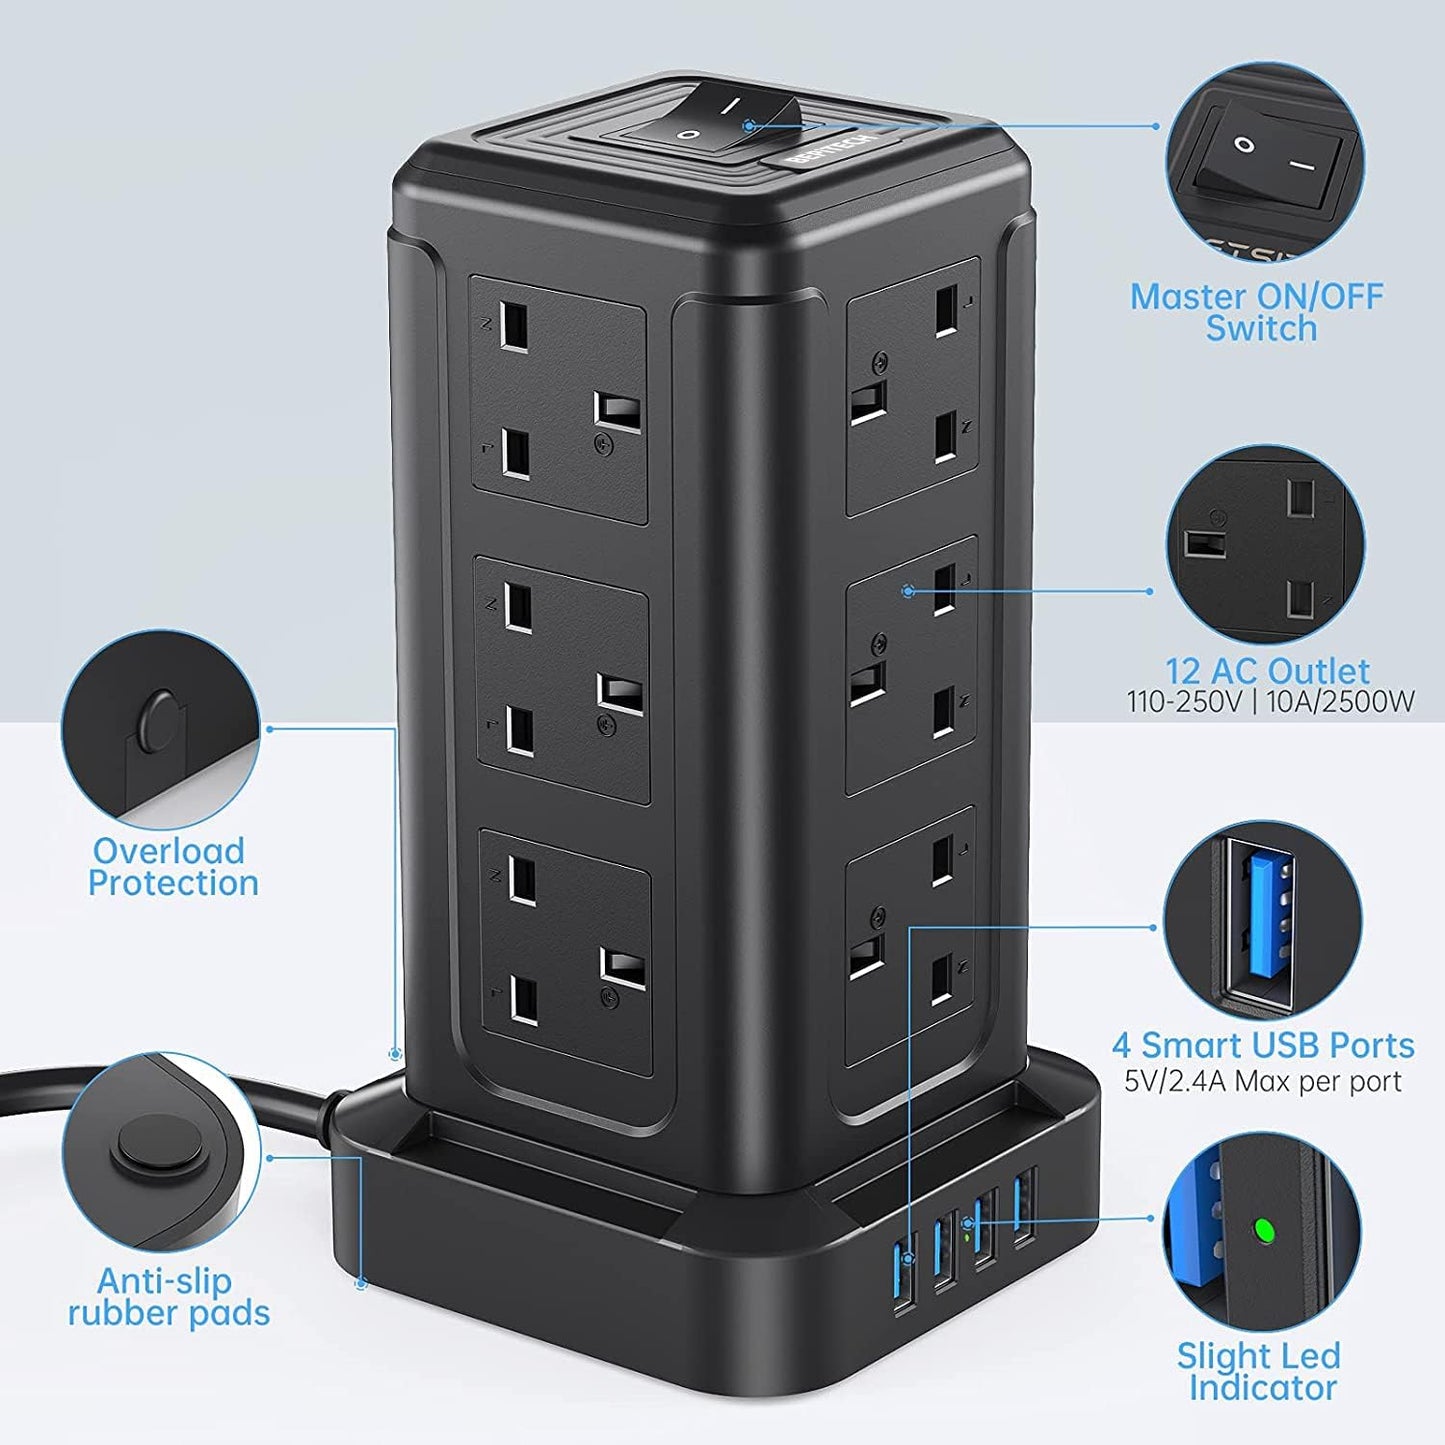 BEPiTECH 3-Meter Power Extension Cord Tower,12 Power Sockets 2500W suitable for big plugs with 4 Smart USB Slots Charging Station, Surge Protector Heavy Duty Power Strip for Office & Home Desktop